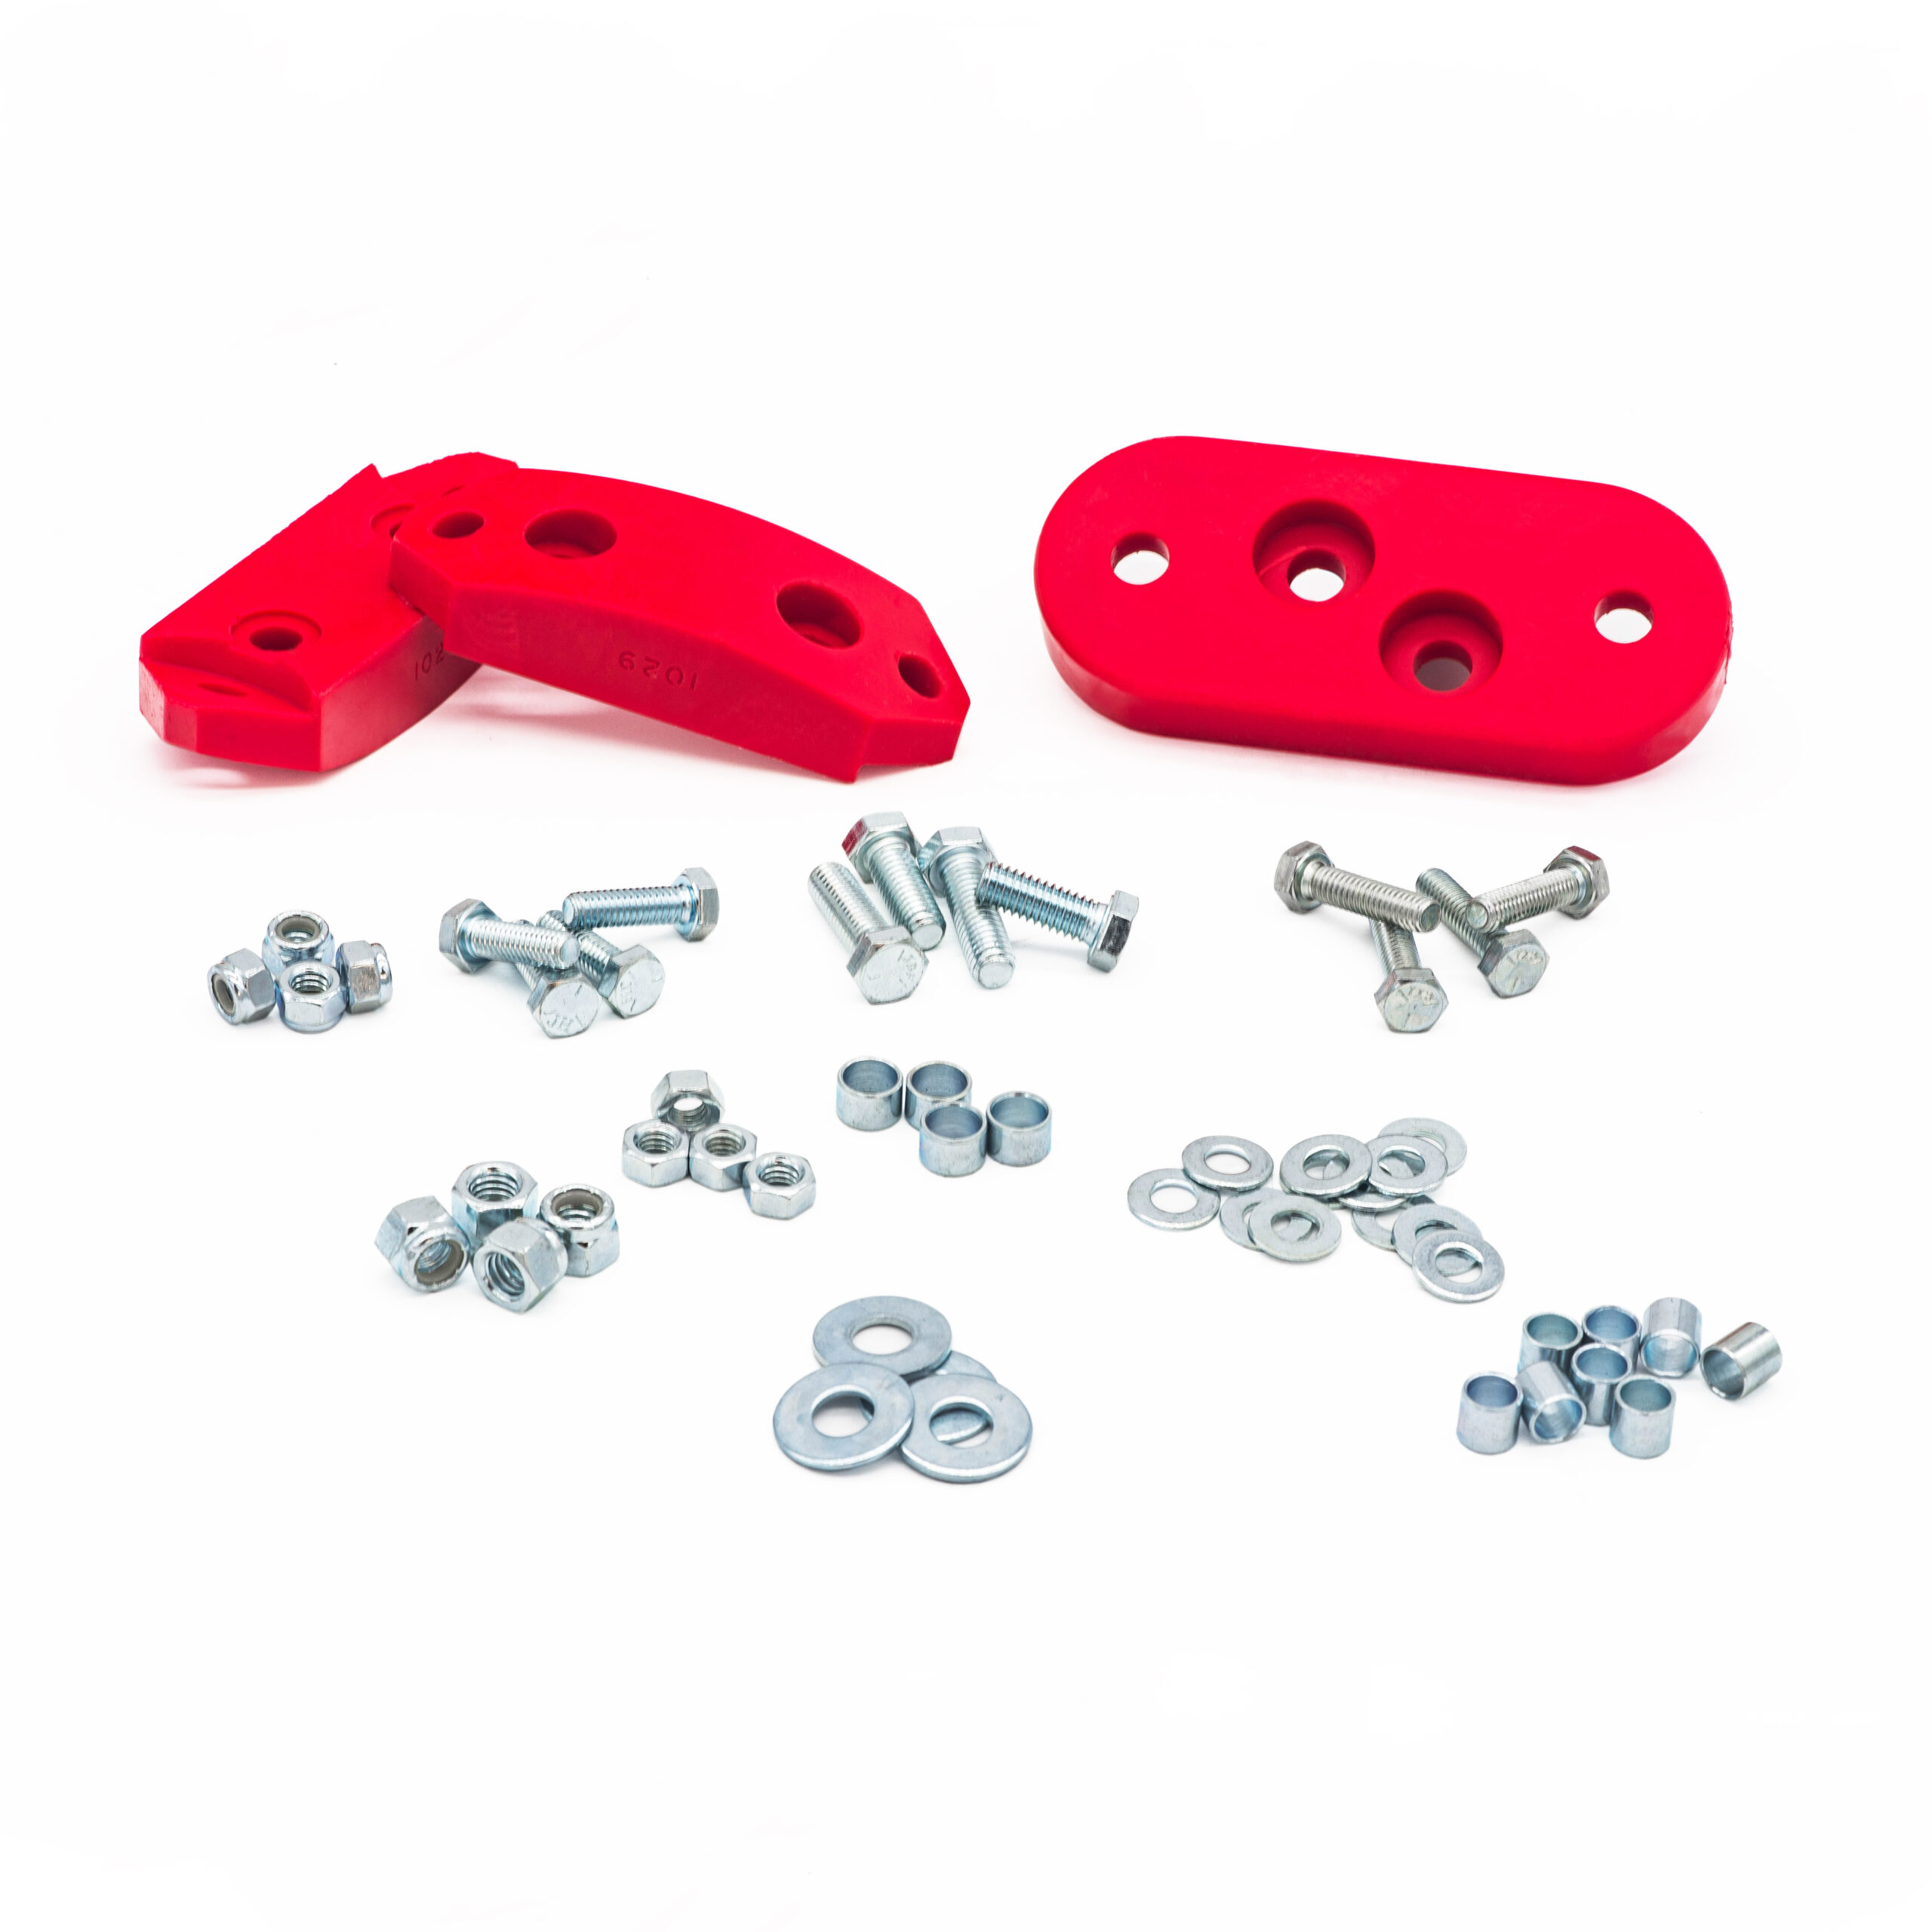 T1 1961-72 Beetle Urethane Complete Gearbox Mount Kit w/ Hardware